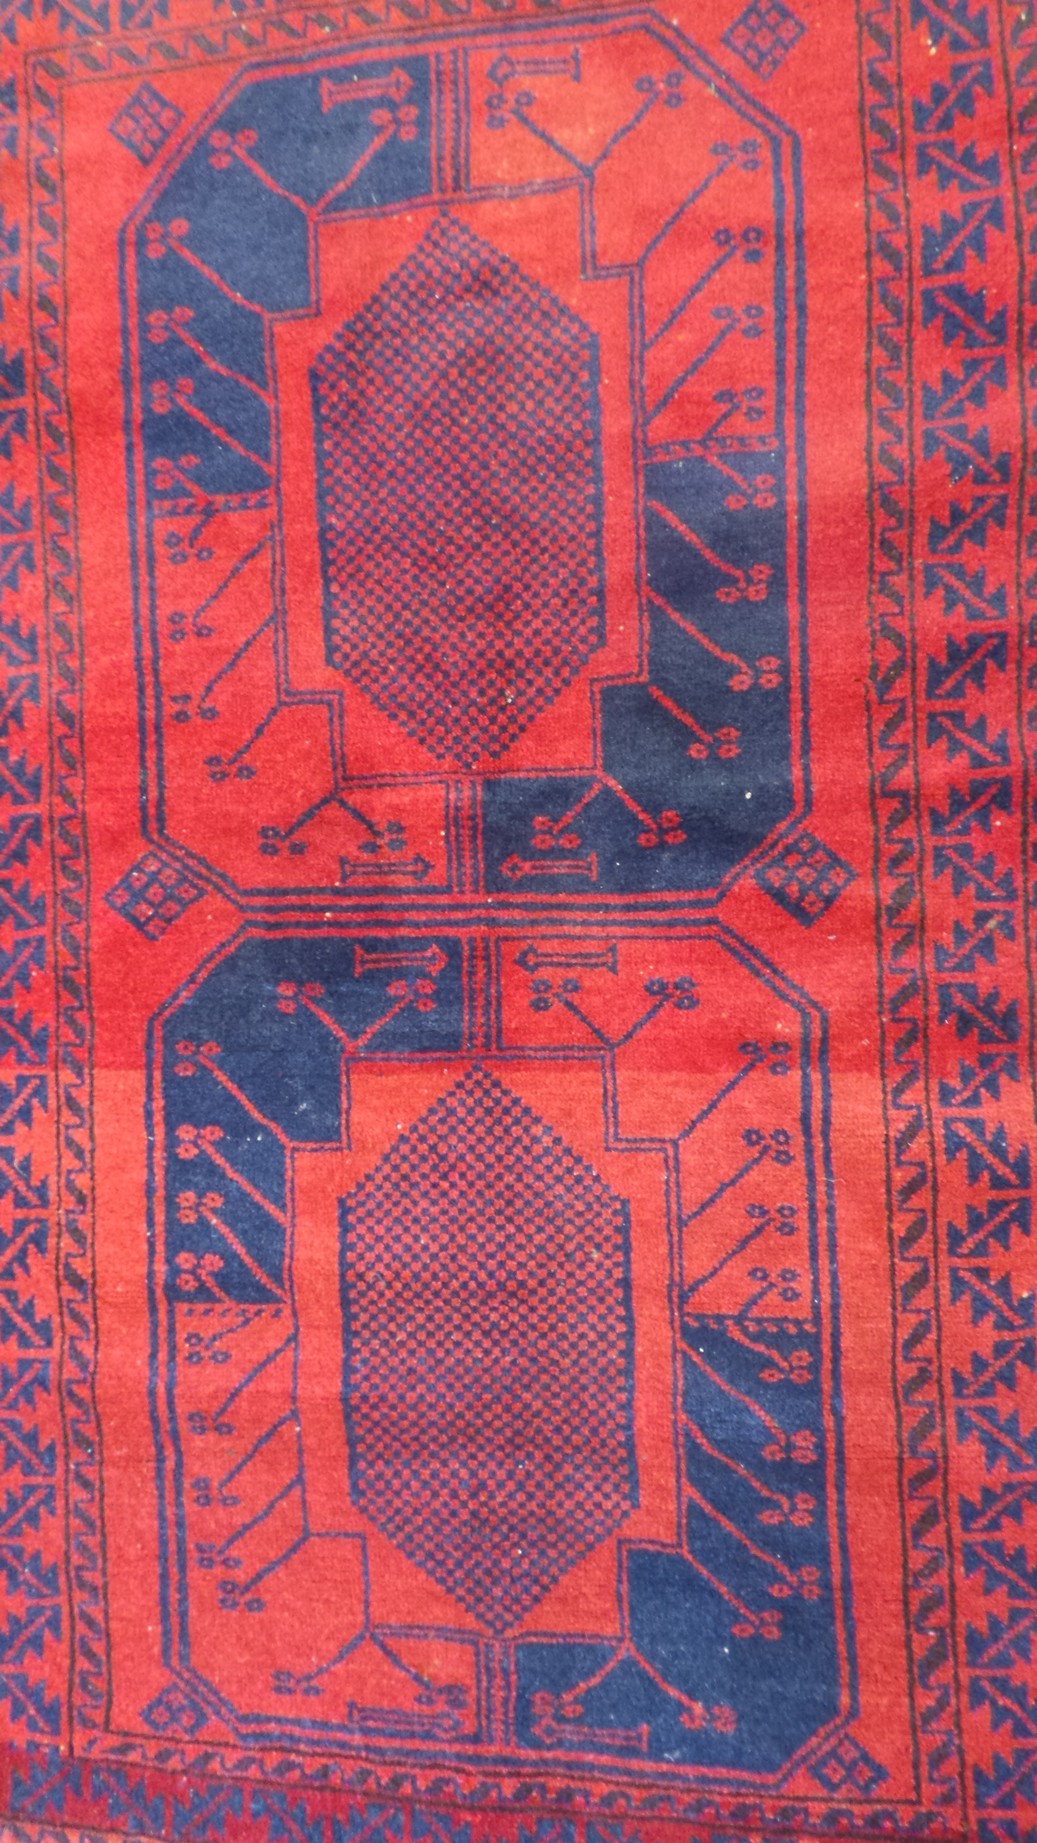 Afghan Beluchi Tribal Rug prominently Red & Blue colours with a large Bacara Design - Image 3 of 3